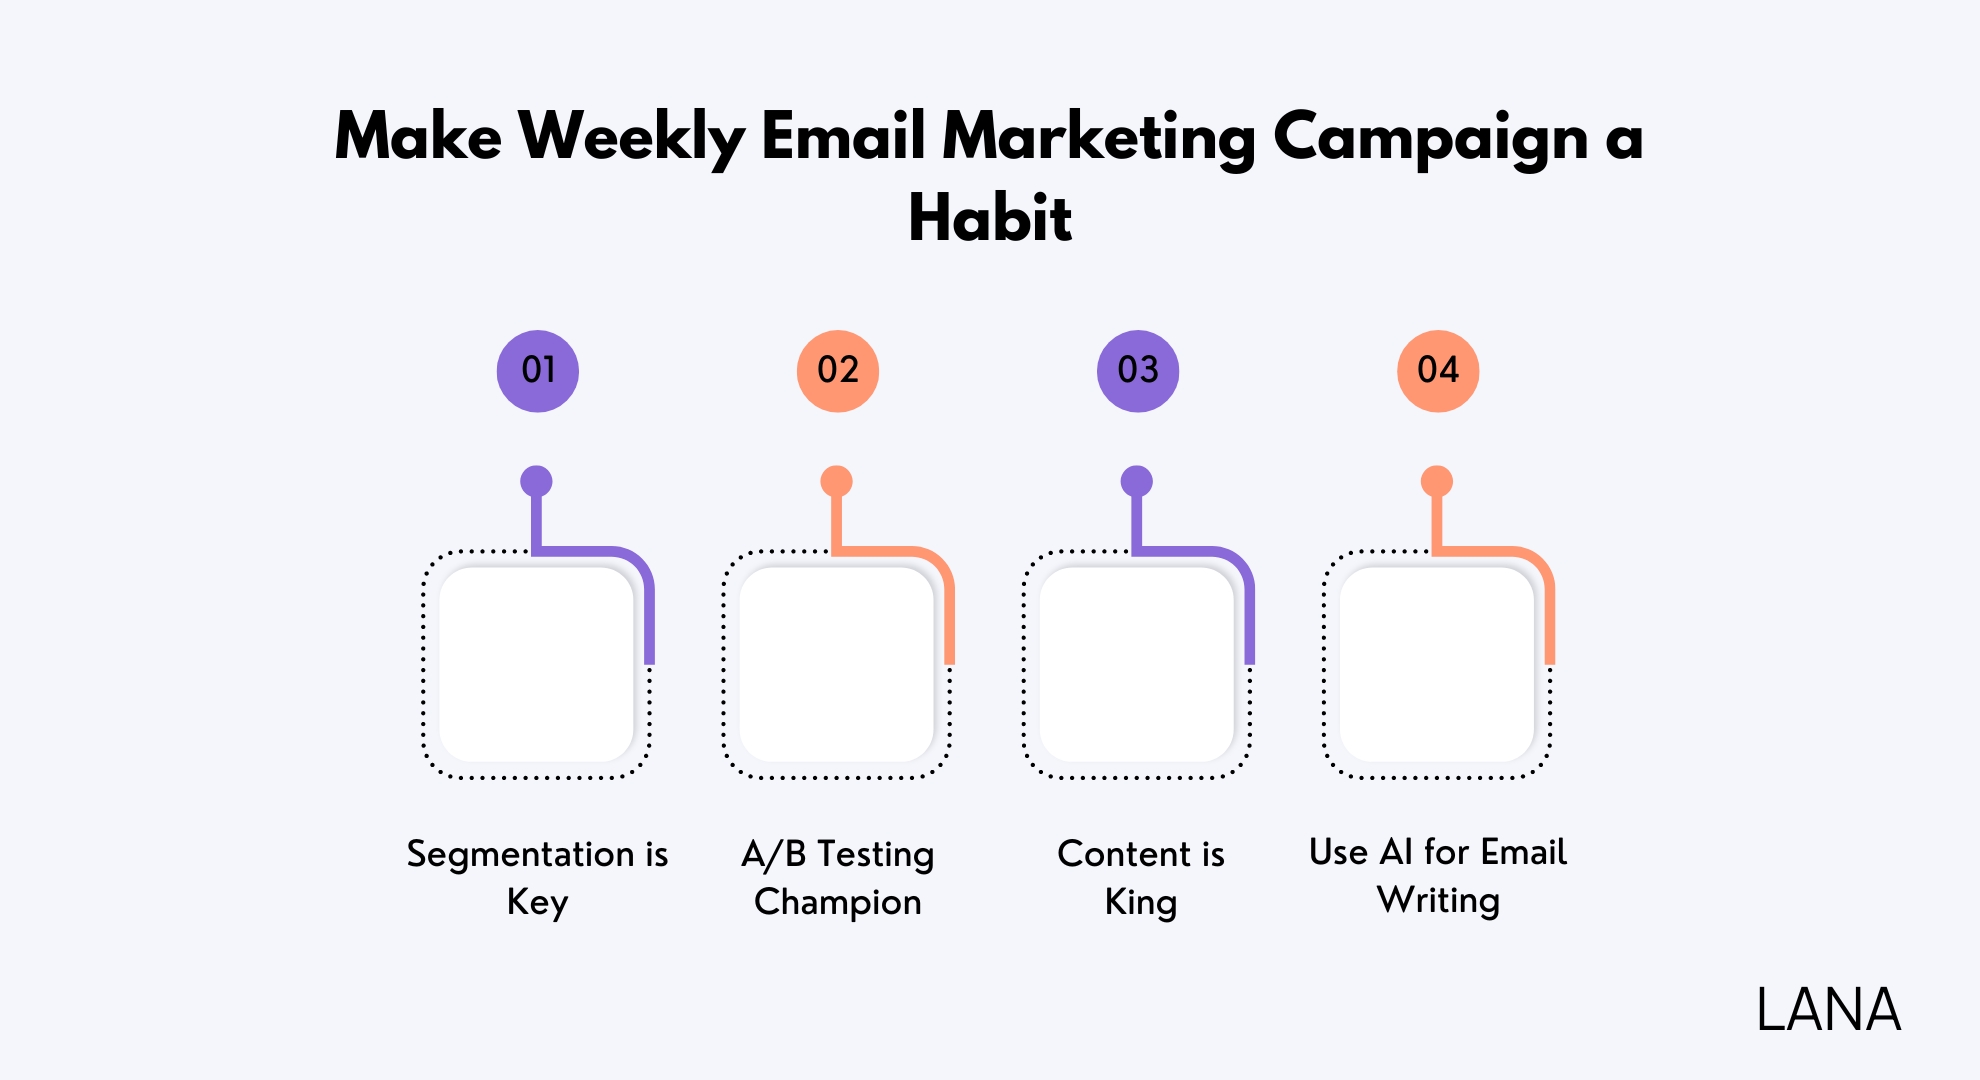 Make Weekly Email Marketing Campaign a Habit